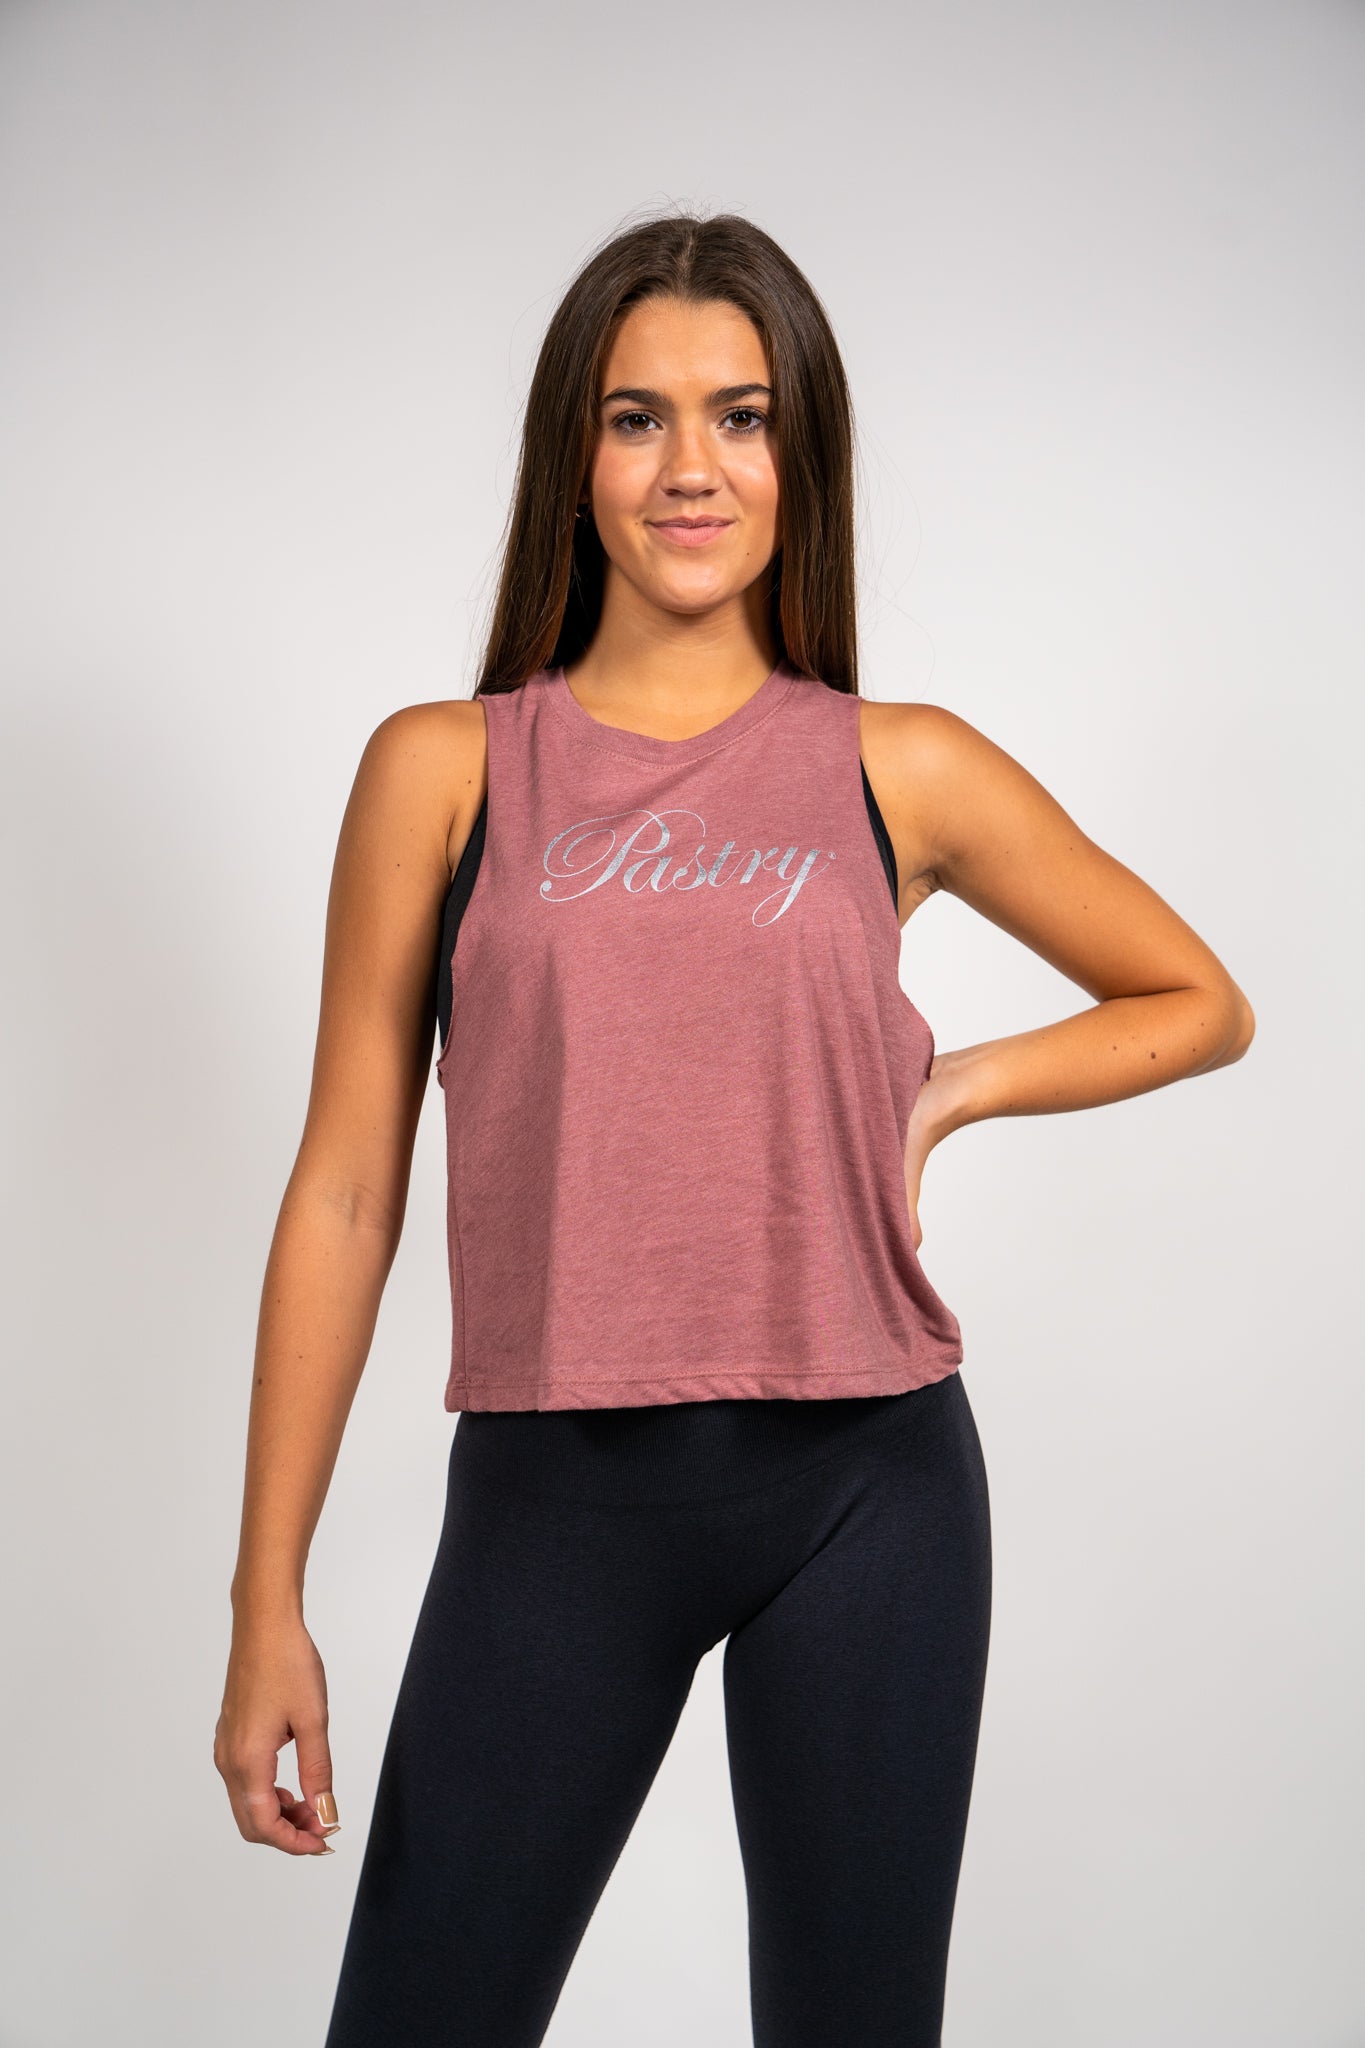 Woman wearing Pastry Cropped Racerback Tank Top Heather Mauve with Silver Logo front view